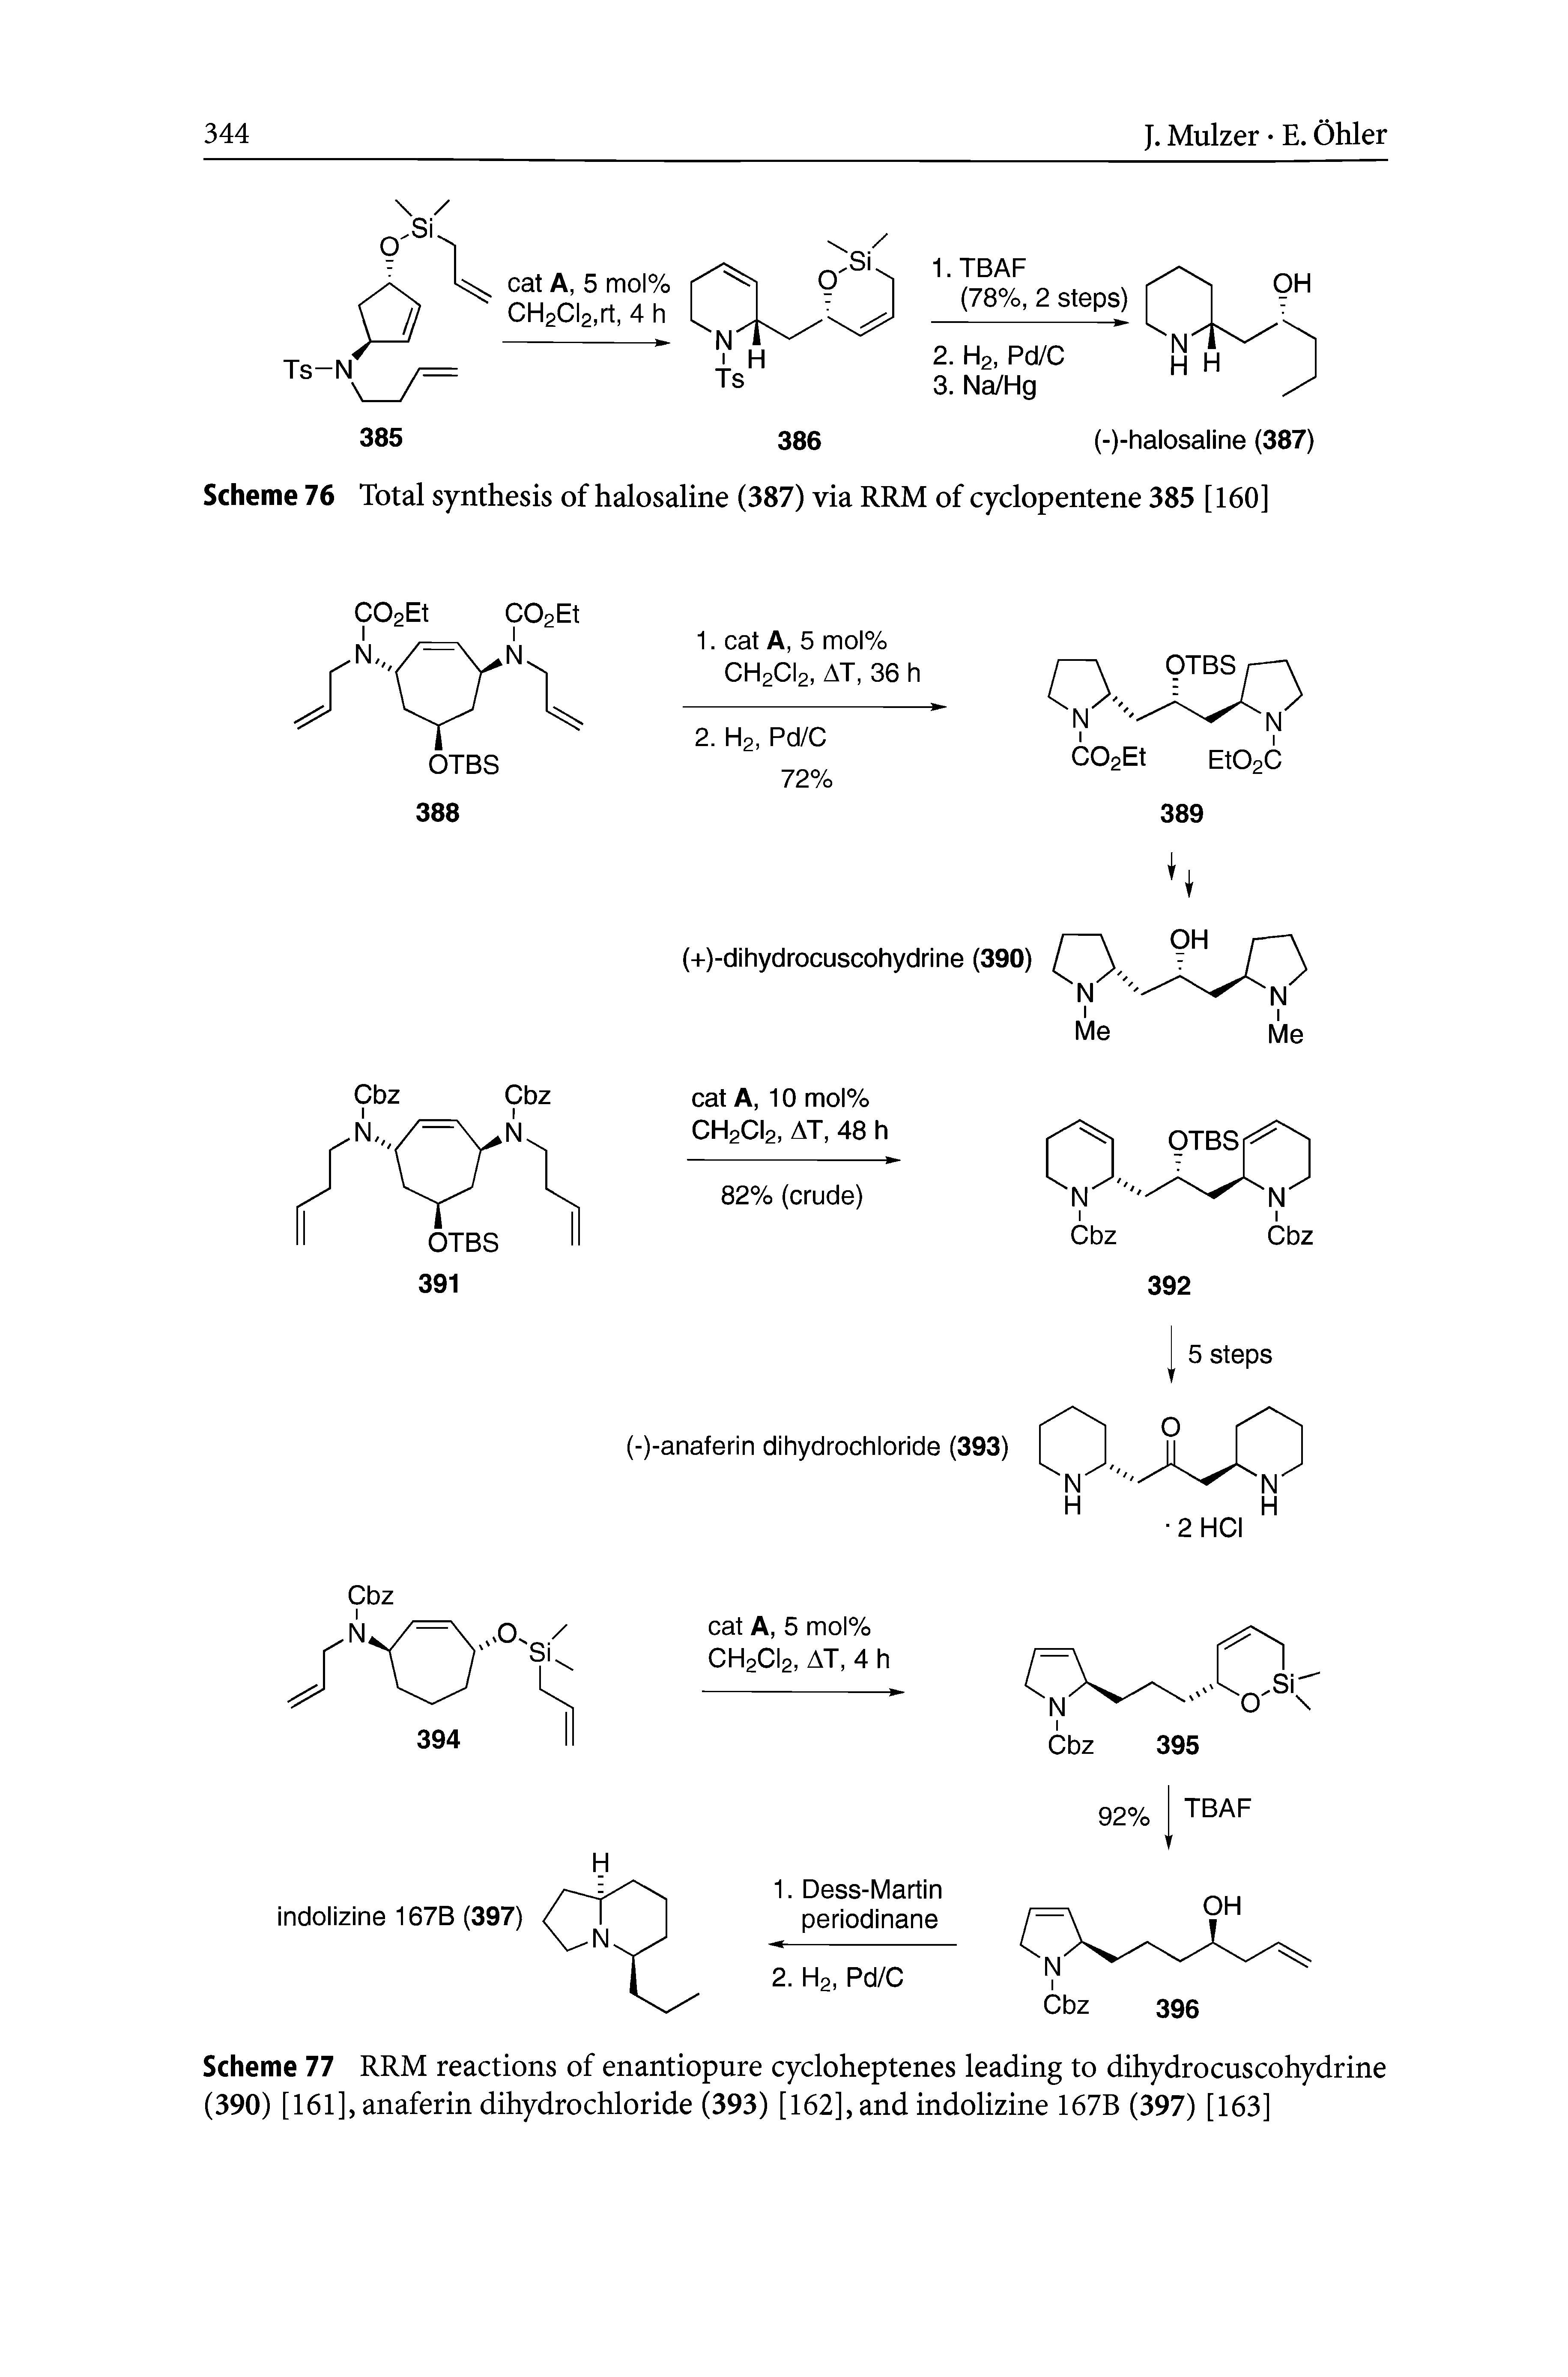 Scheme 77 RRM reactions of enantiopure cycloheptenes leading to dihydrocuscohydrine (390) [161], anaferin dihydrochloride (393) [162], and indolizine 167B (397) [163]...